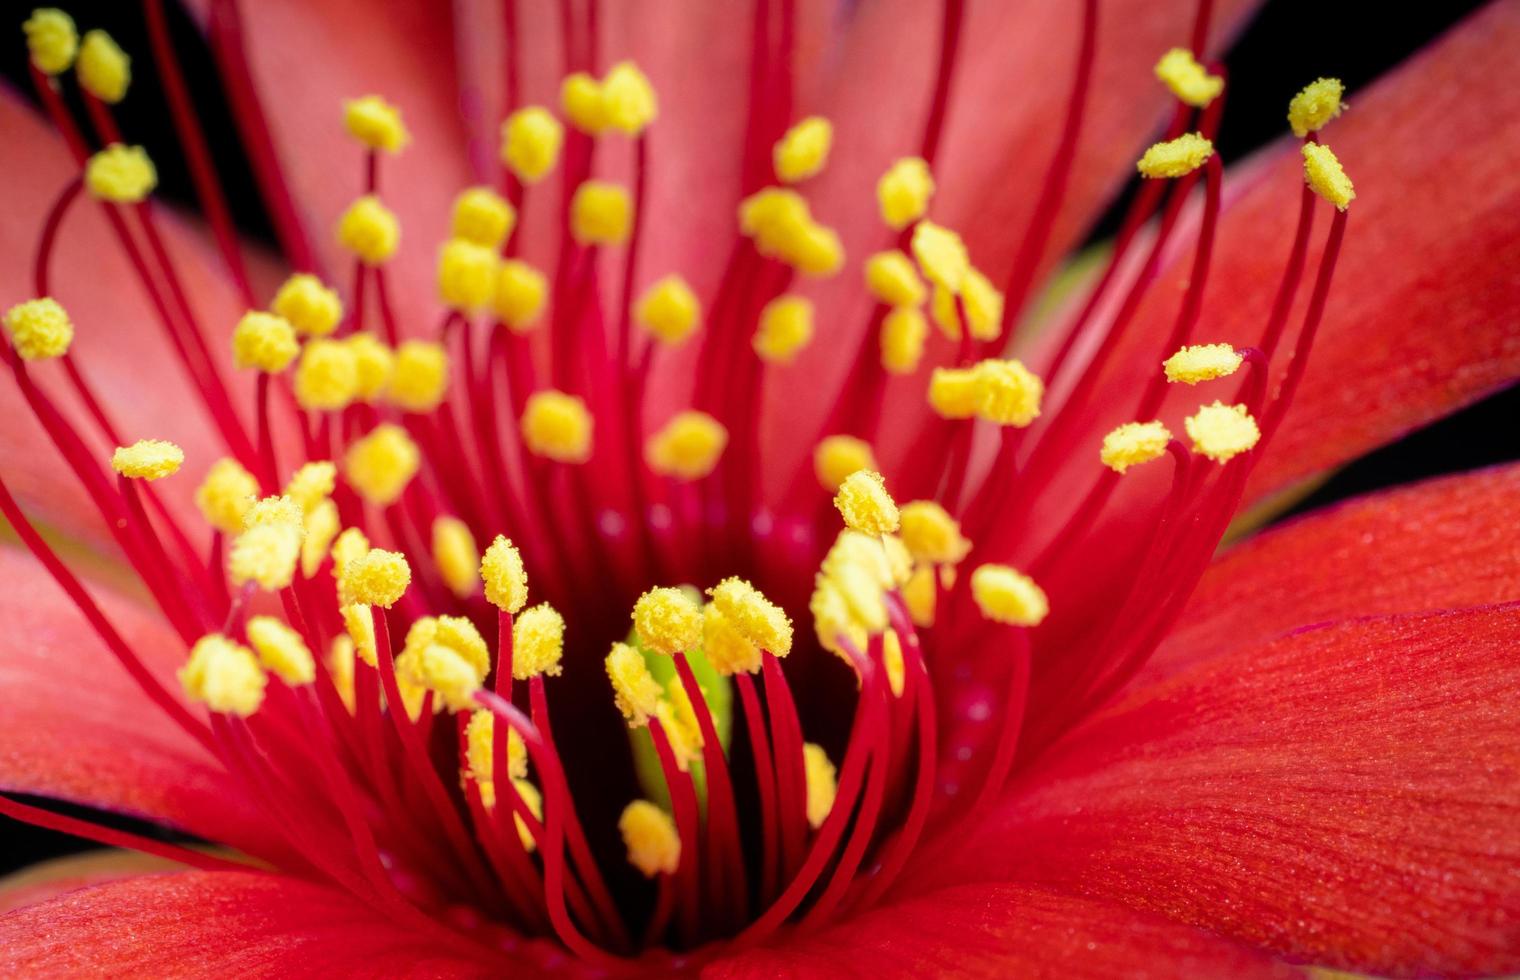 yellow pollen On numerous red peduncles of flowers from Red Cactus. The central stamens are blurred red petals in the background. photo